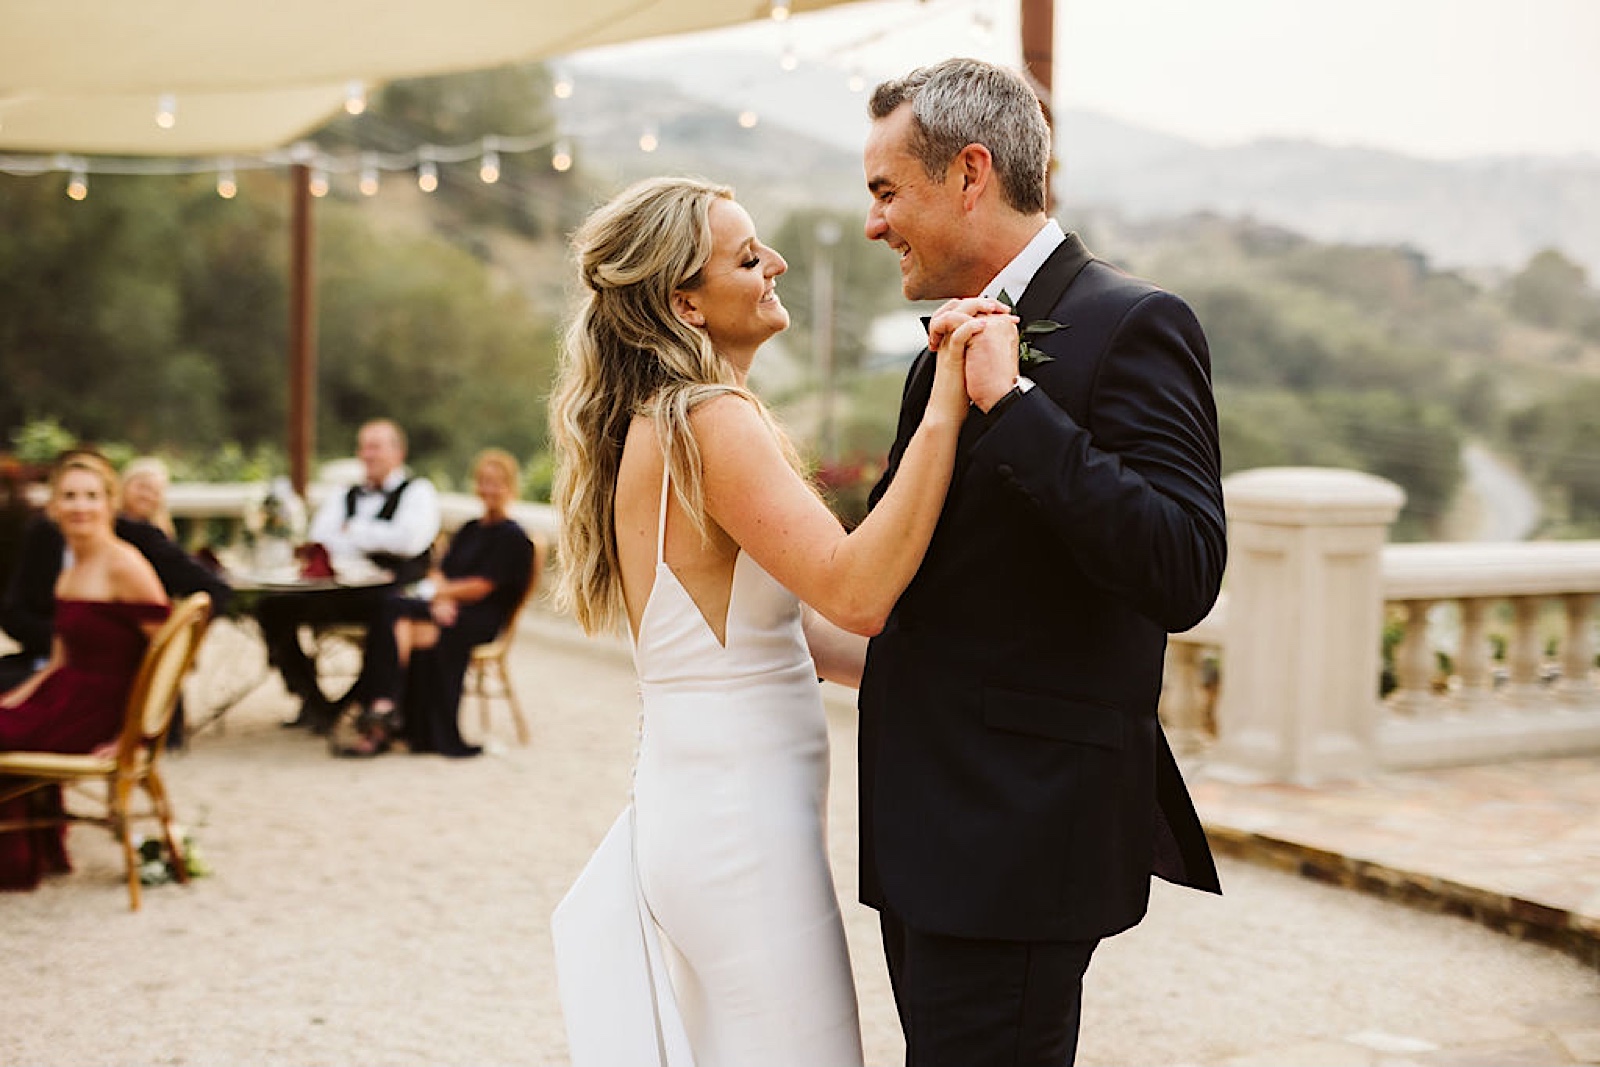 Vibrant Wedding At Siren Song Vineyard: bride and groom first dance